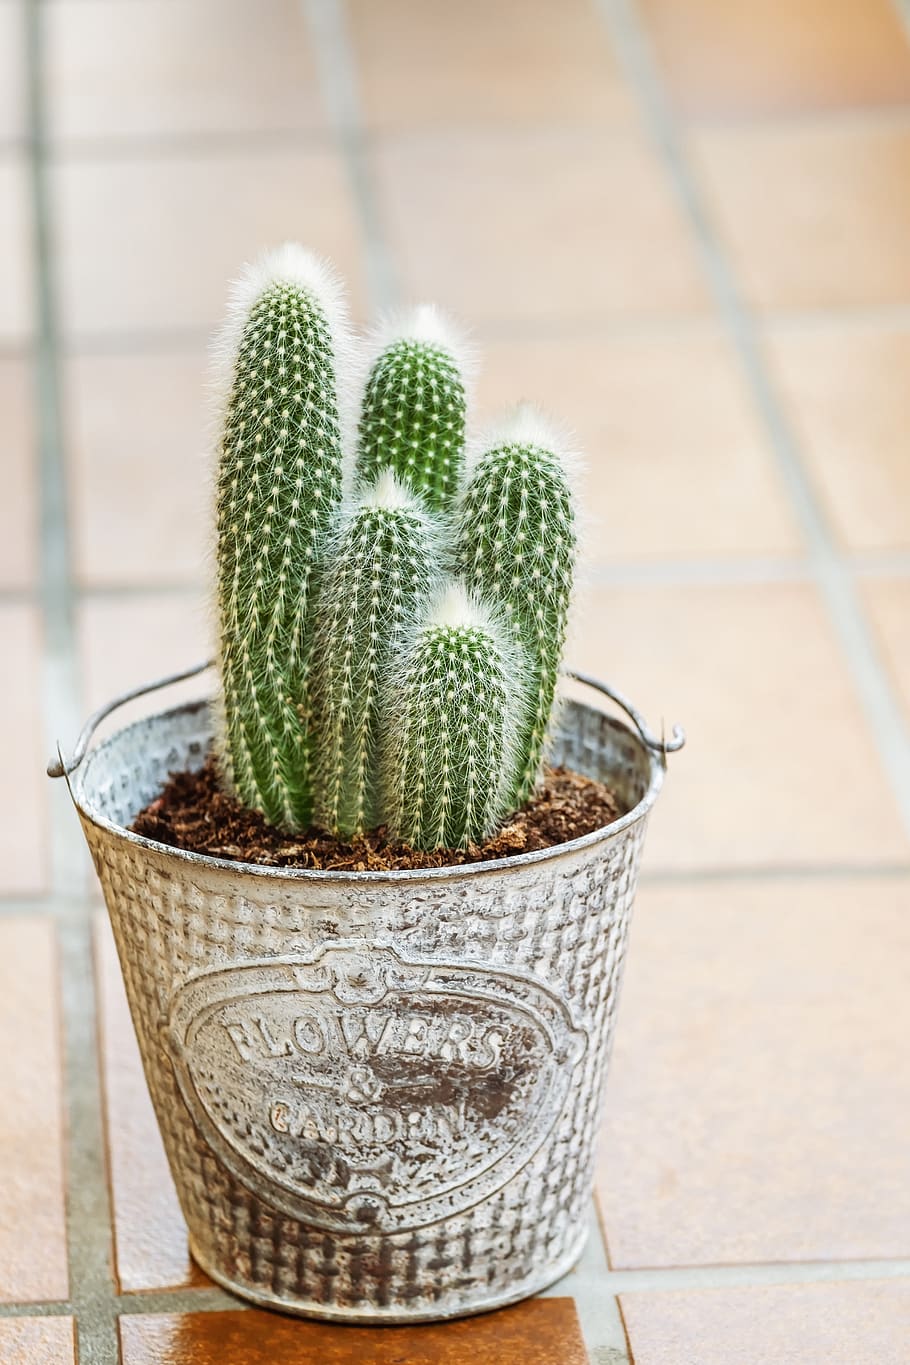 cactus, houseplant, plant, green, pot, flowerpot, potted plant, prickly, thorn, botanical